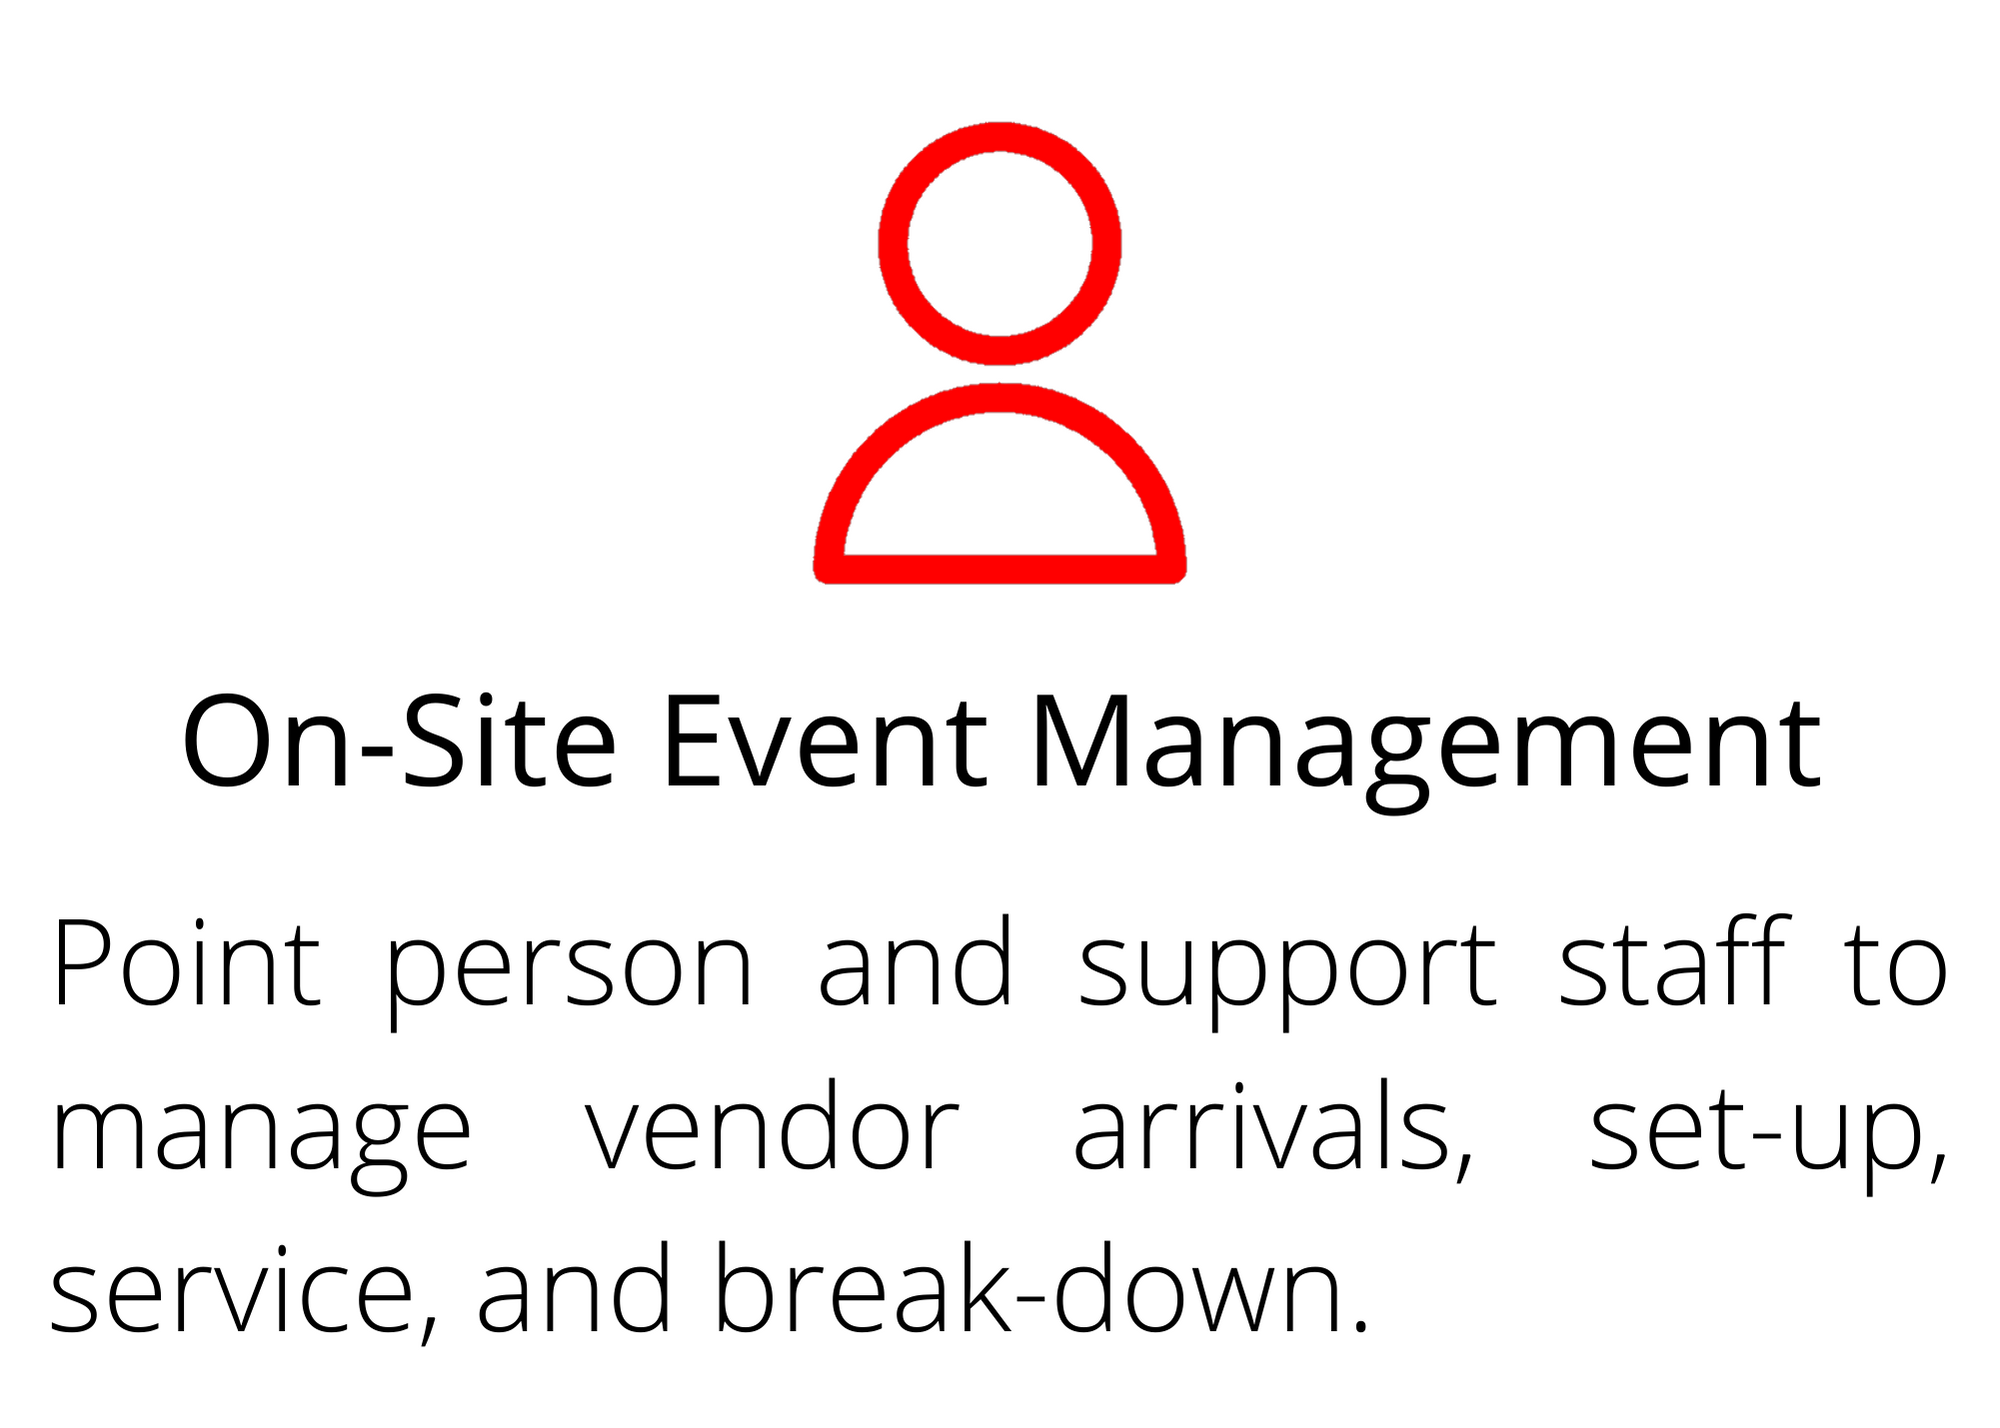 On-Site Event Management